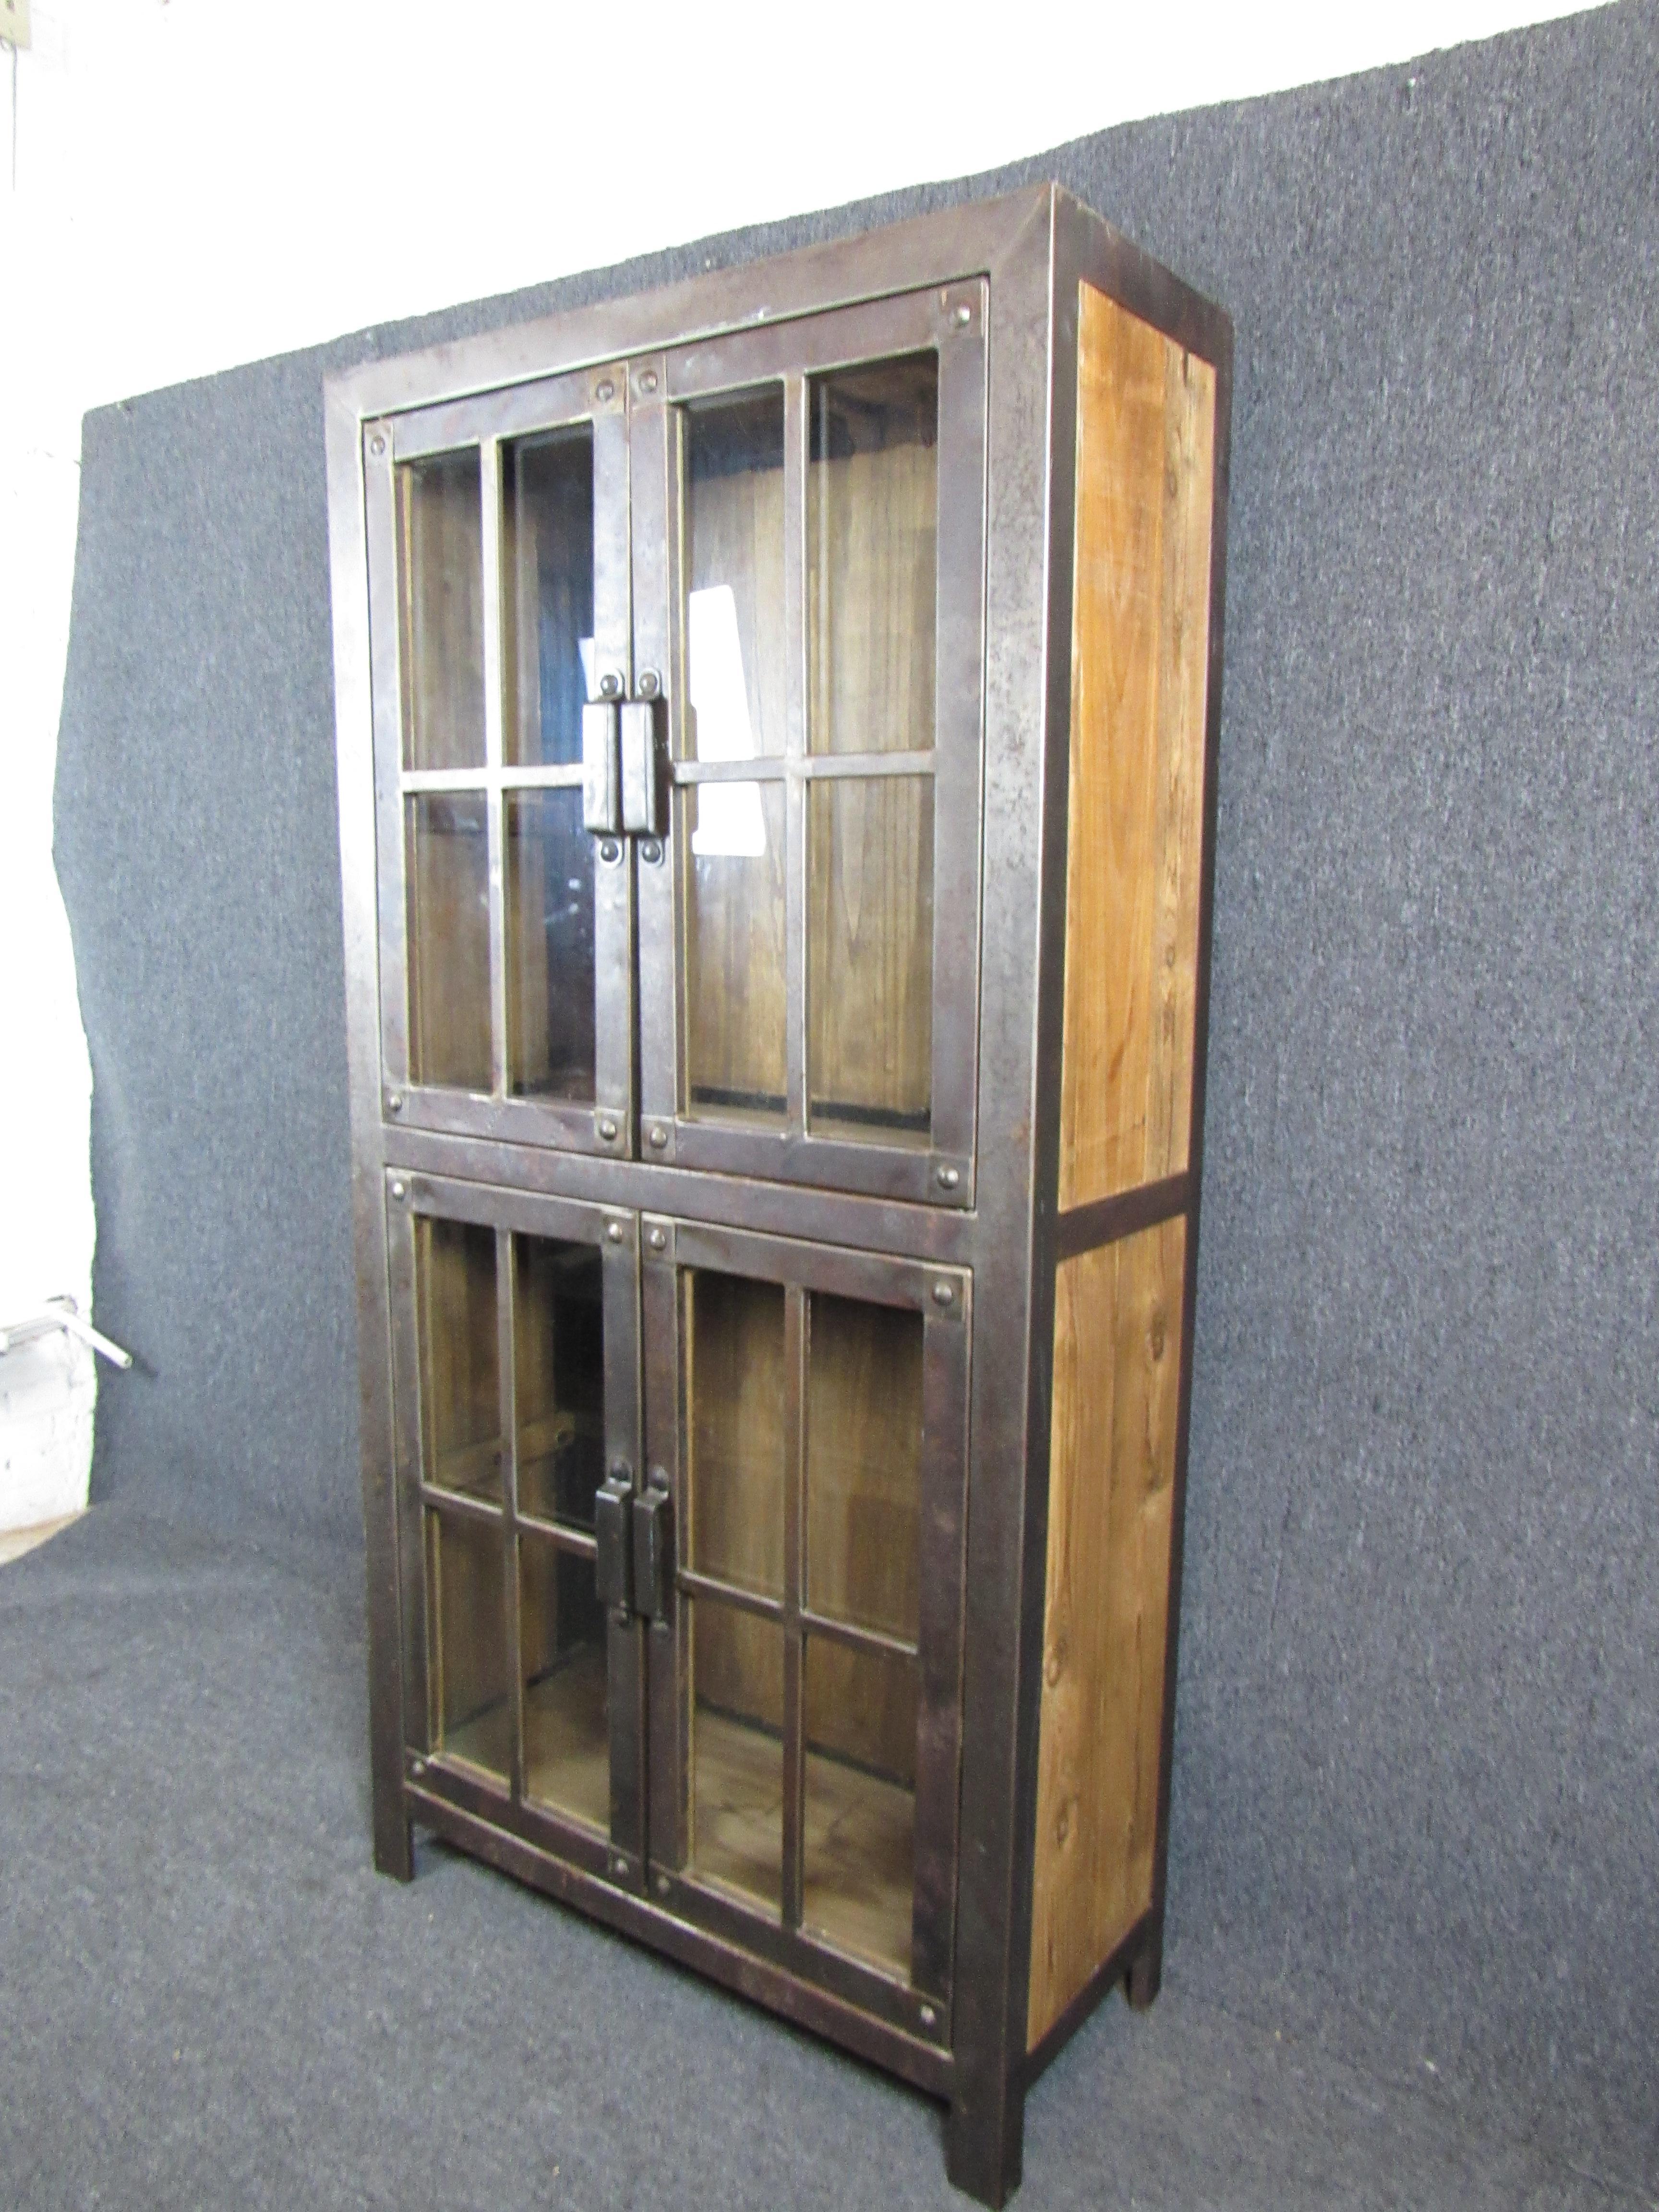 Industrial cabinet made from reclaimed iron and lumber. Glass doors with iron trim, accented by large exposed rivets. Great for kitchen or living room storage.

(Please confirm item location - NY or NJ - with dealer).